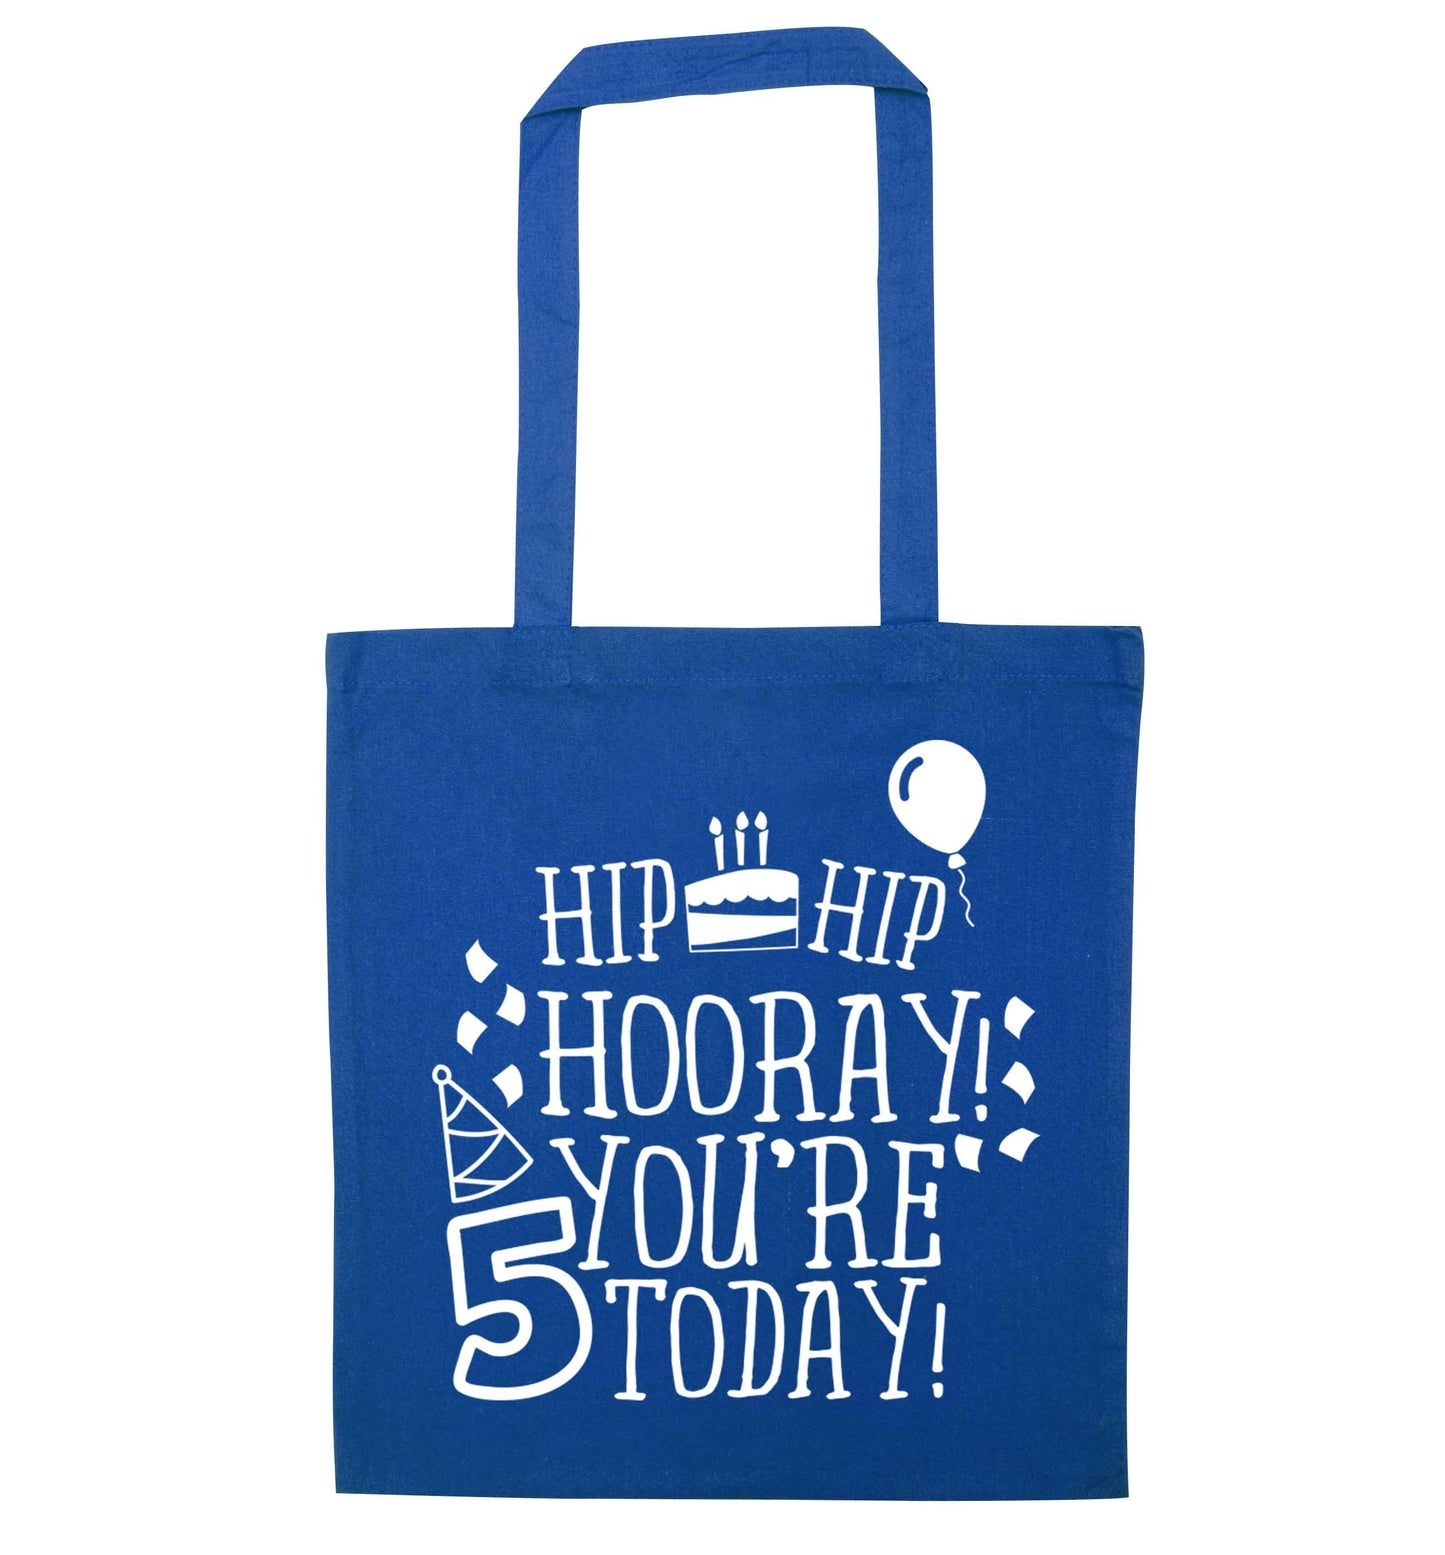 Hip hip hooray you're five today! blue tote bag